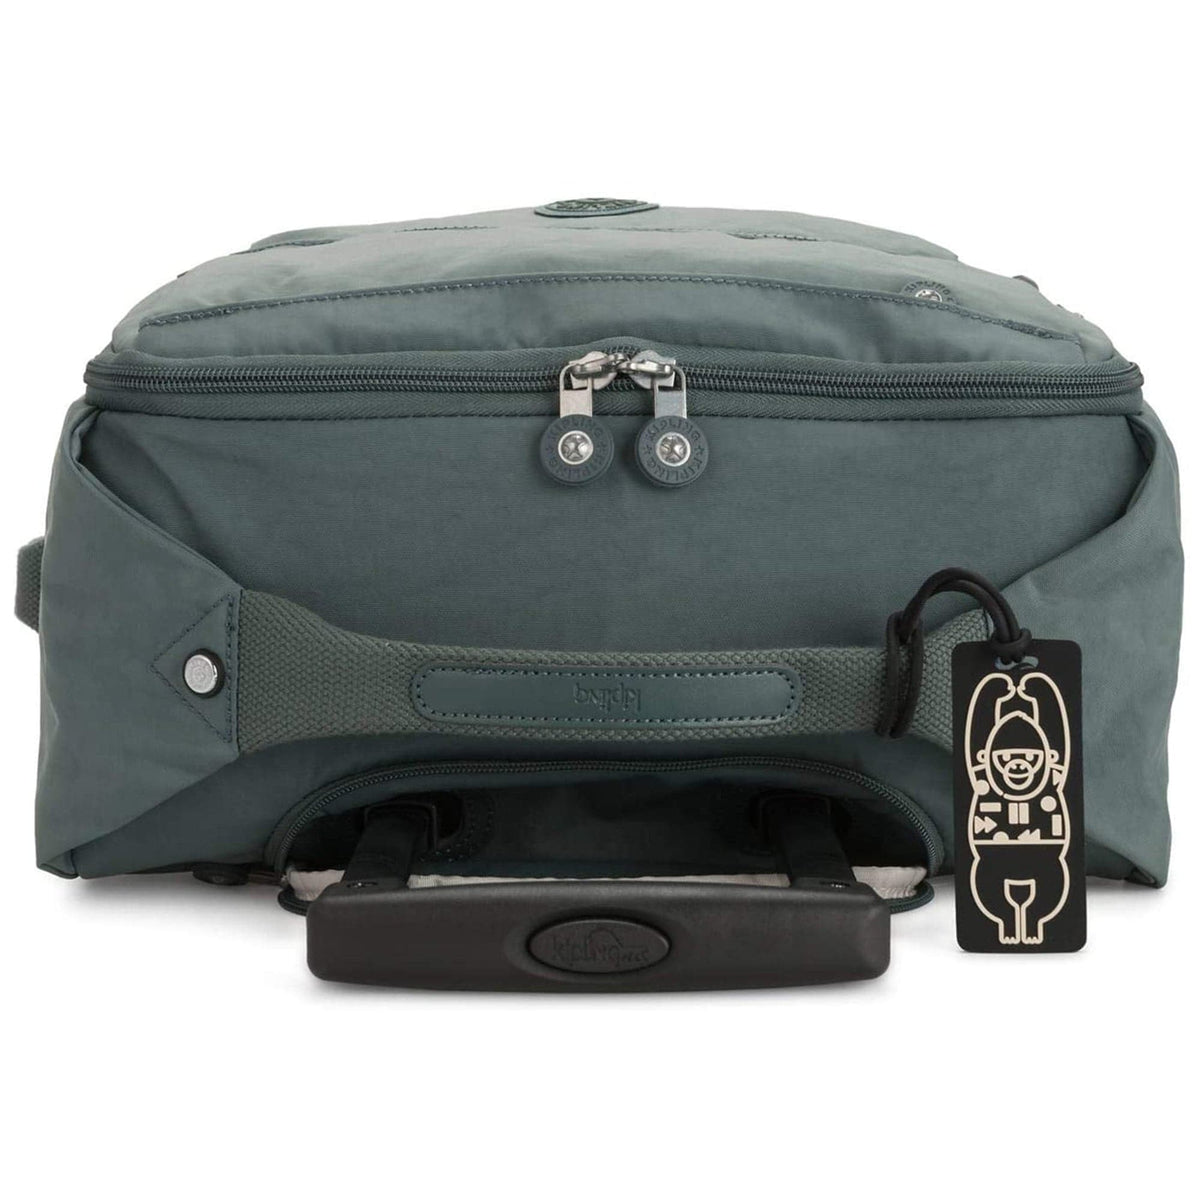 Kipling Darcey Small Carry-On Rolling Luggage